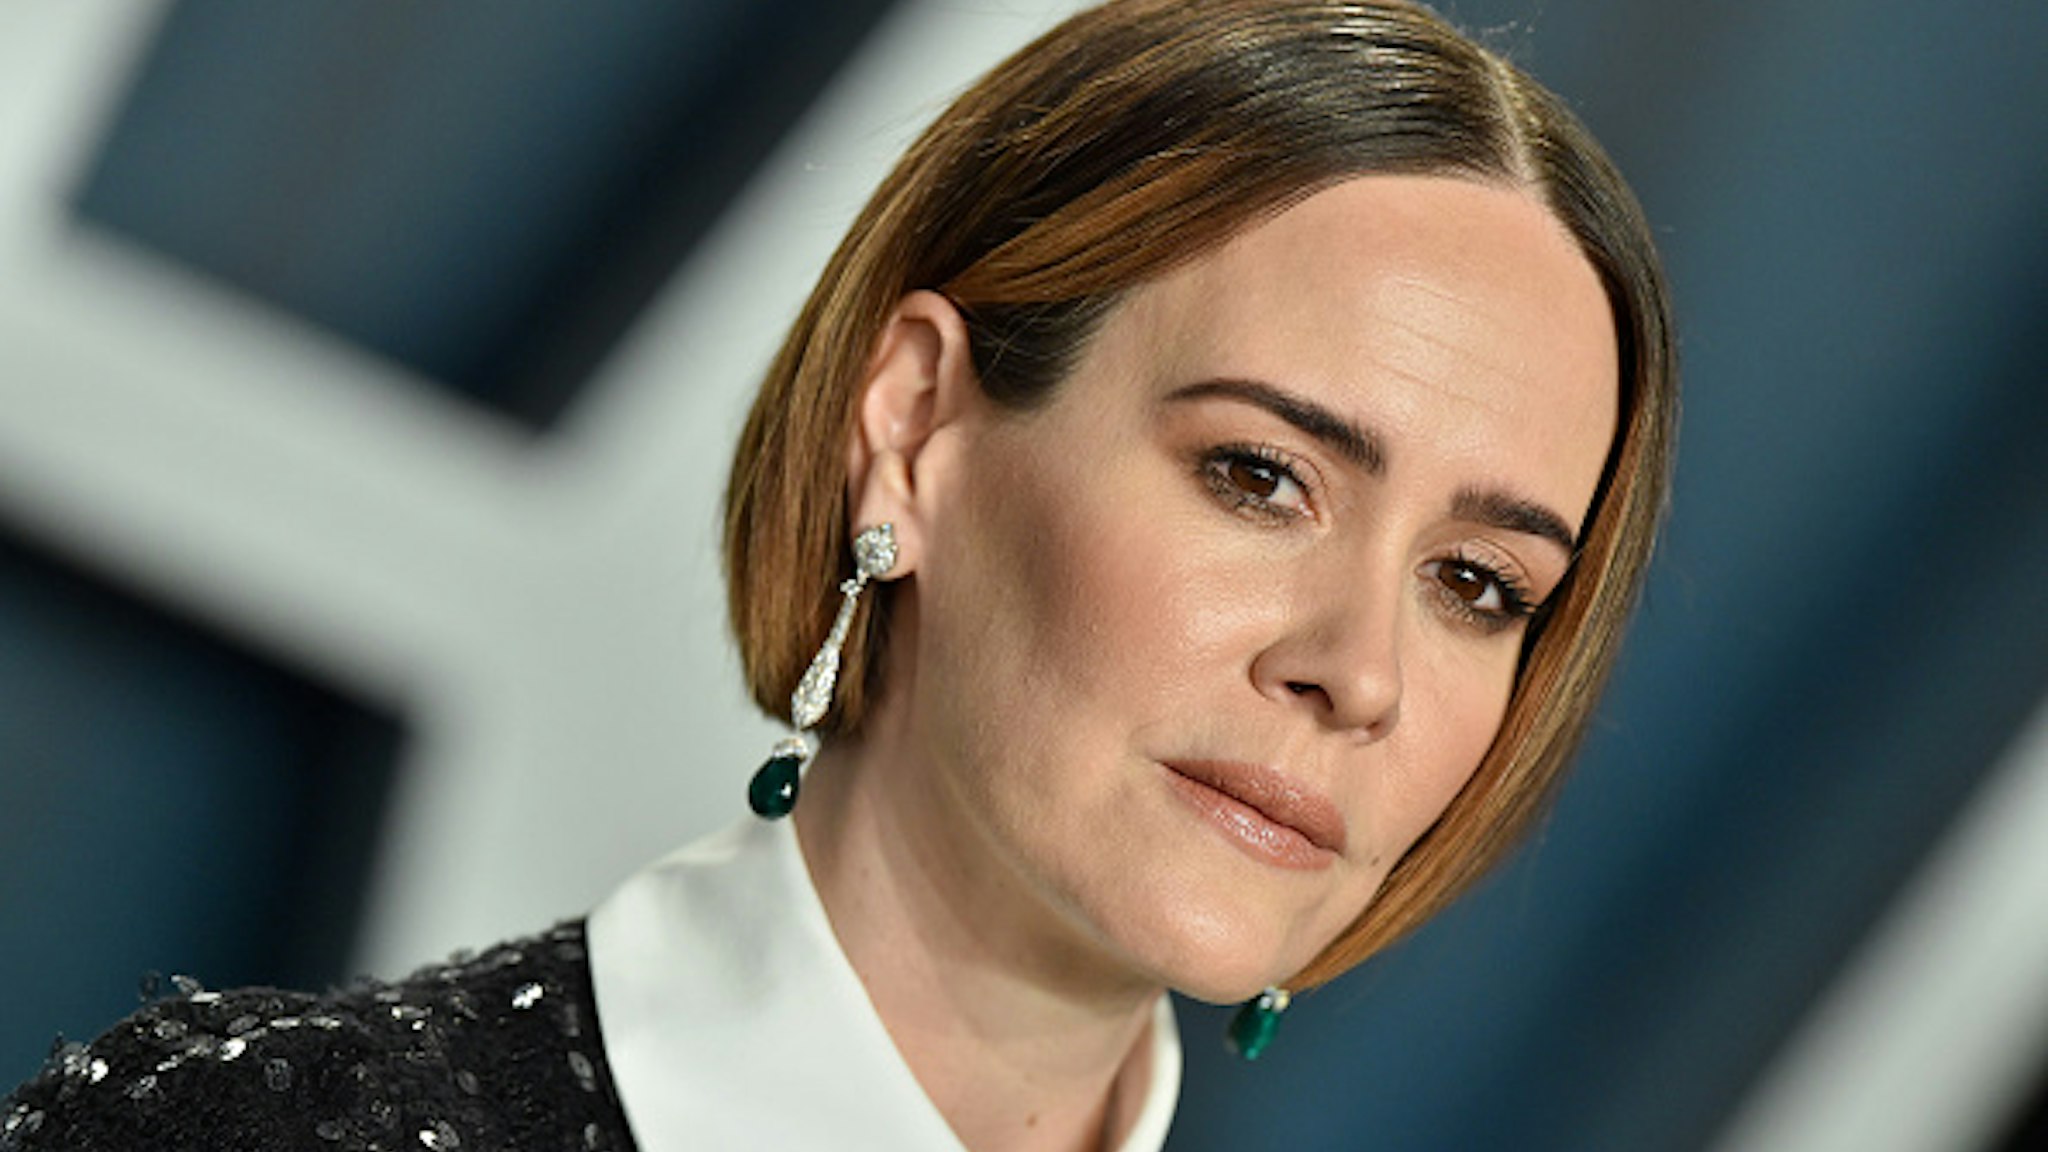 BEVERLY HILLS, CALIFORNIA - FEBRUARY 09: Sarah Paulson attends the 2020 Vanity Fair Oscar Party hosted by Radhika Jones at Wallis Annenberg Center for the Performing Arts on February 09, 2020 in Beverly Hills, California.